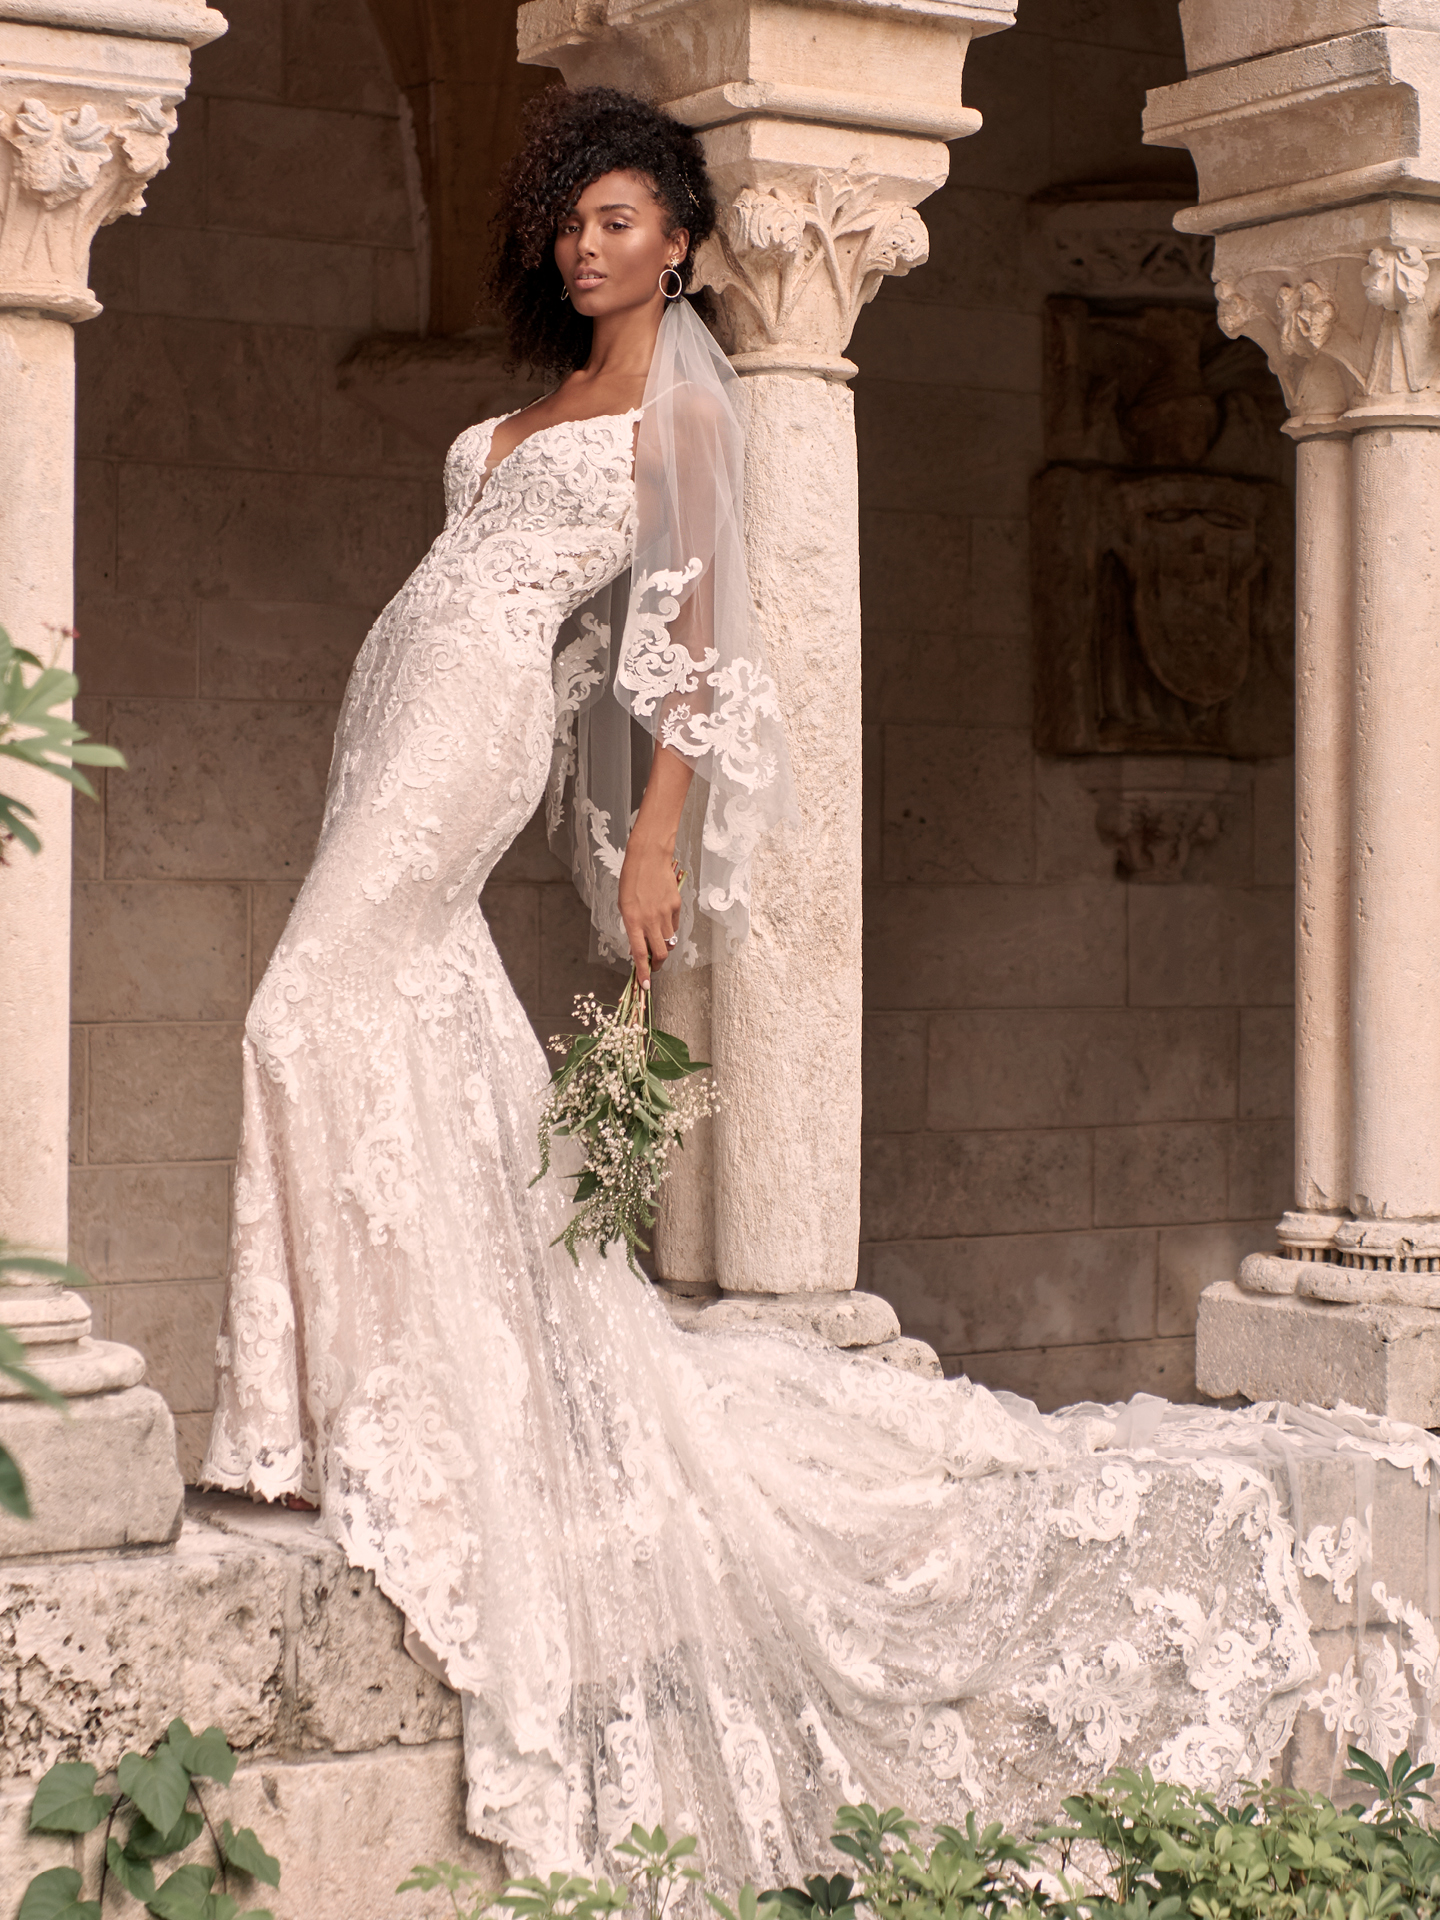 Black Model Wearing Sparkly Lace Sheath Bridal Gown with Extended Train Called Tuscany Royale by Maggie Sottero